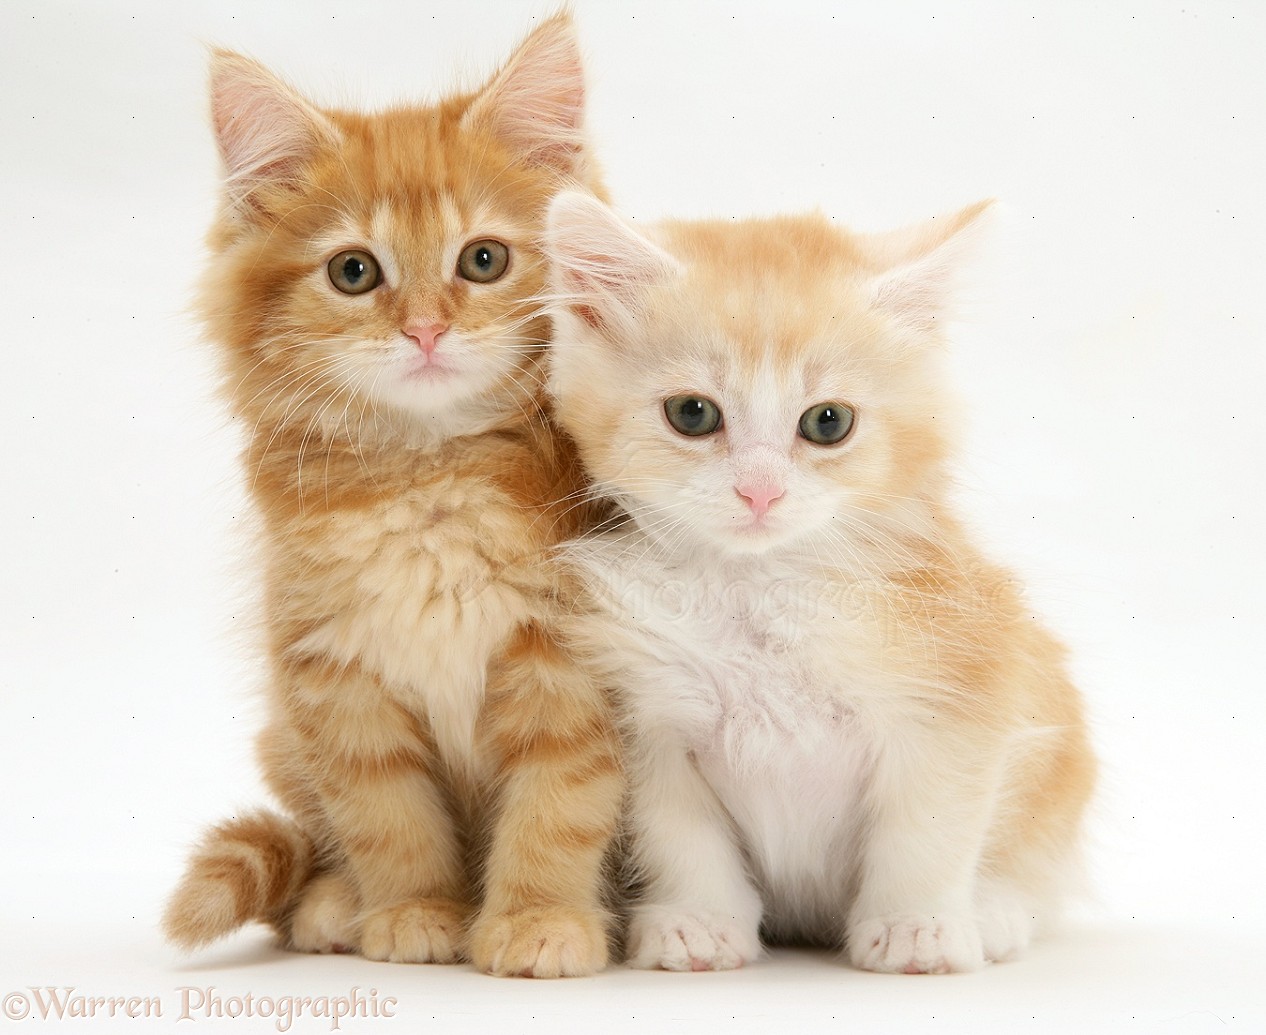 Coon maine ginger kittens cat background